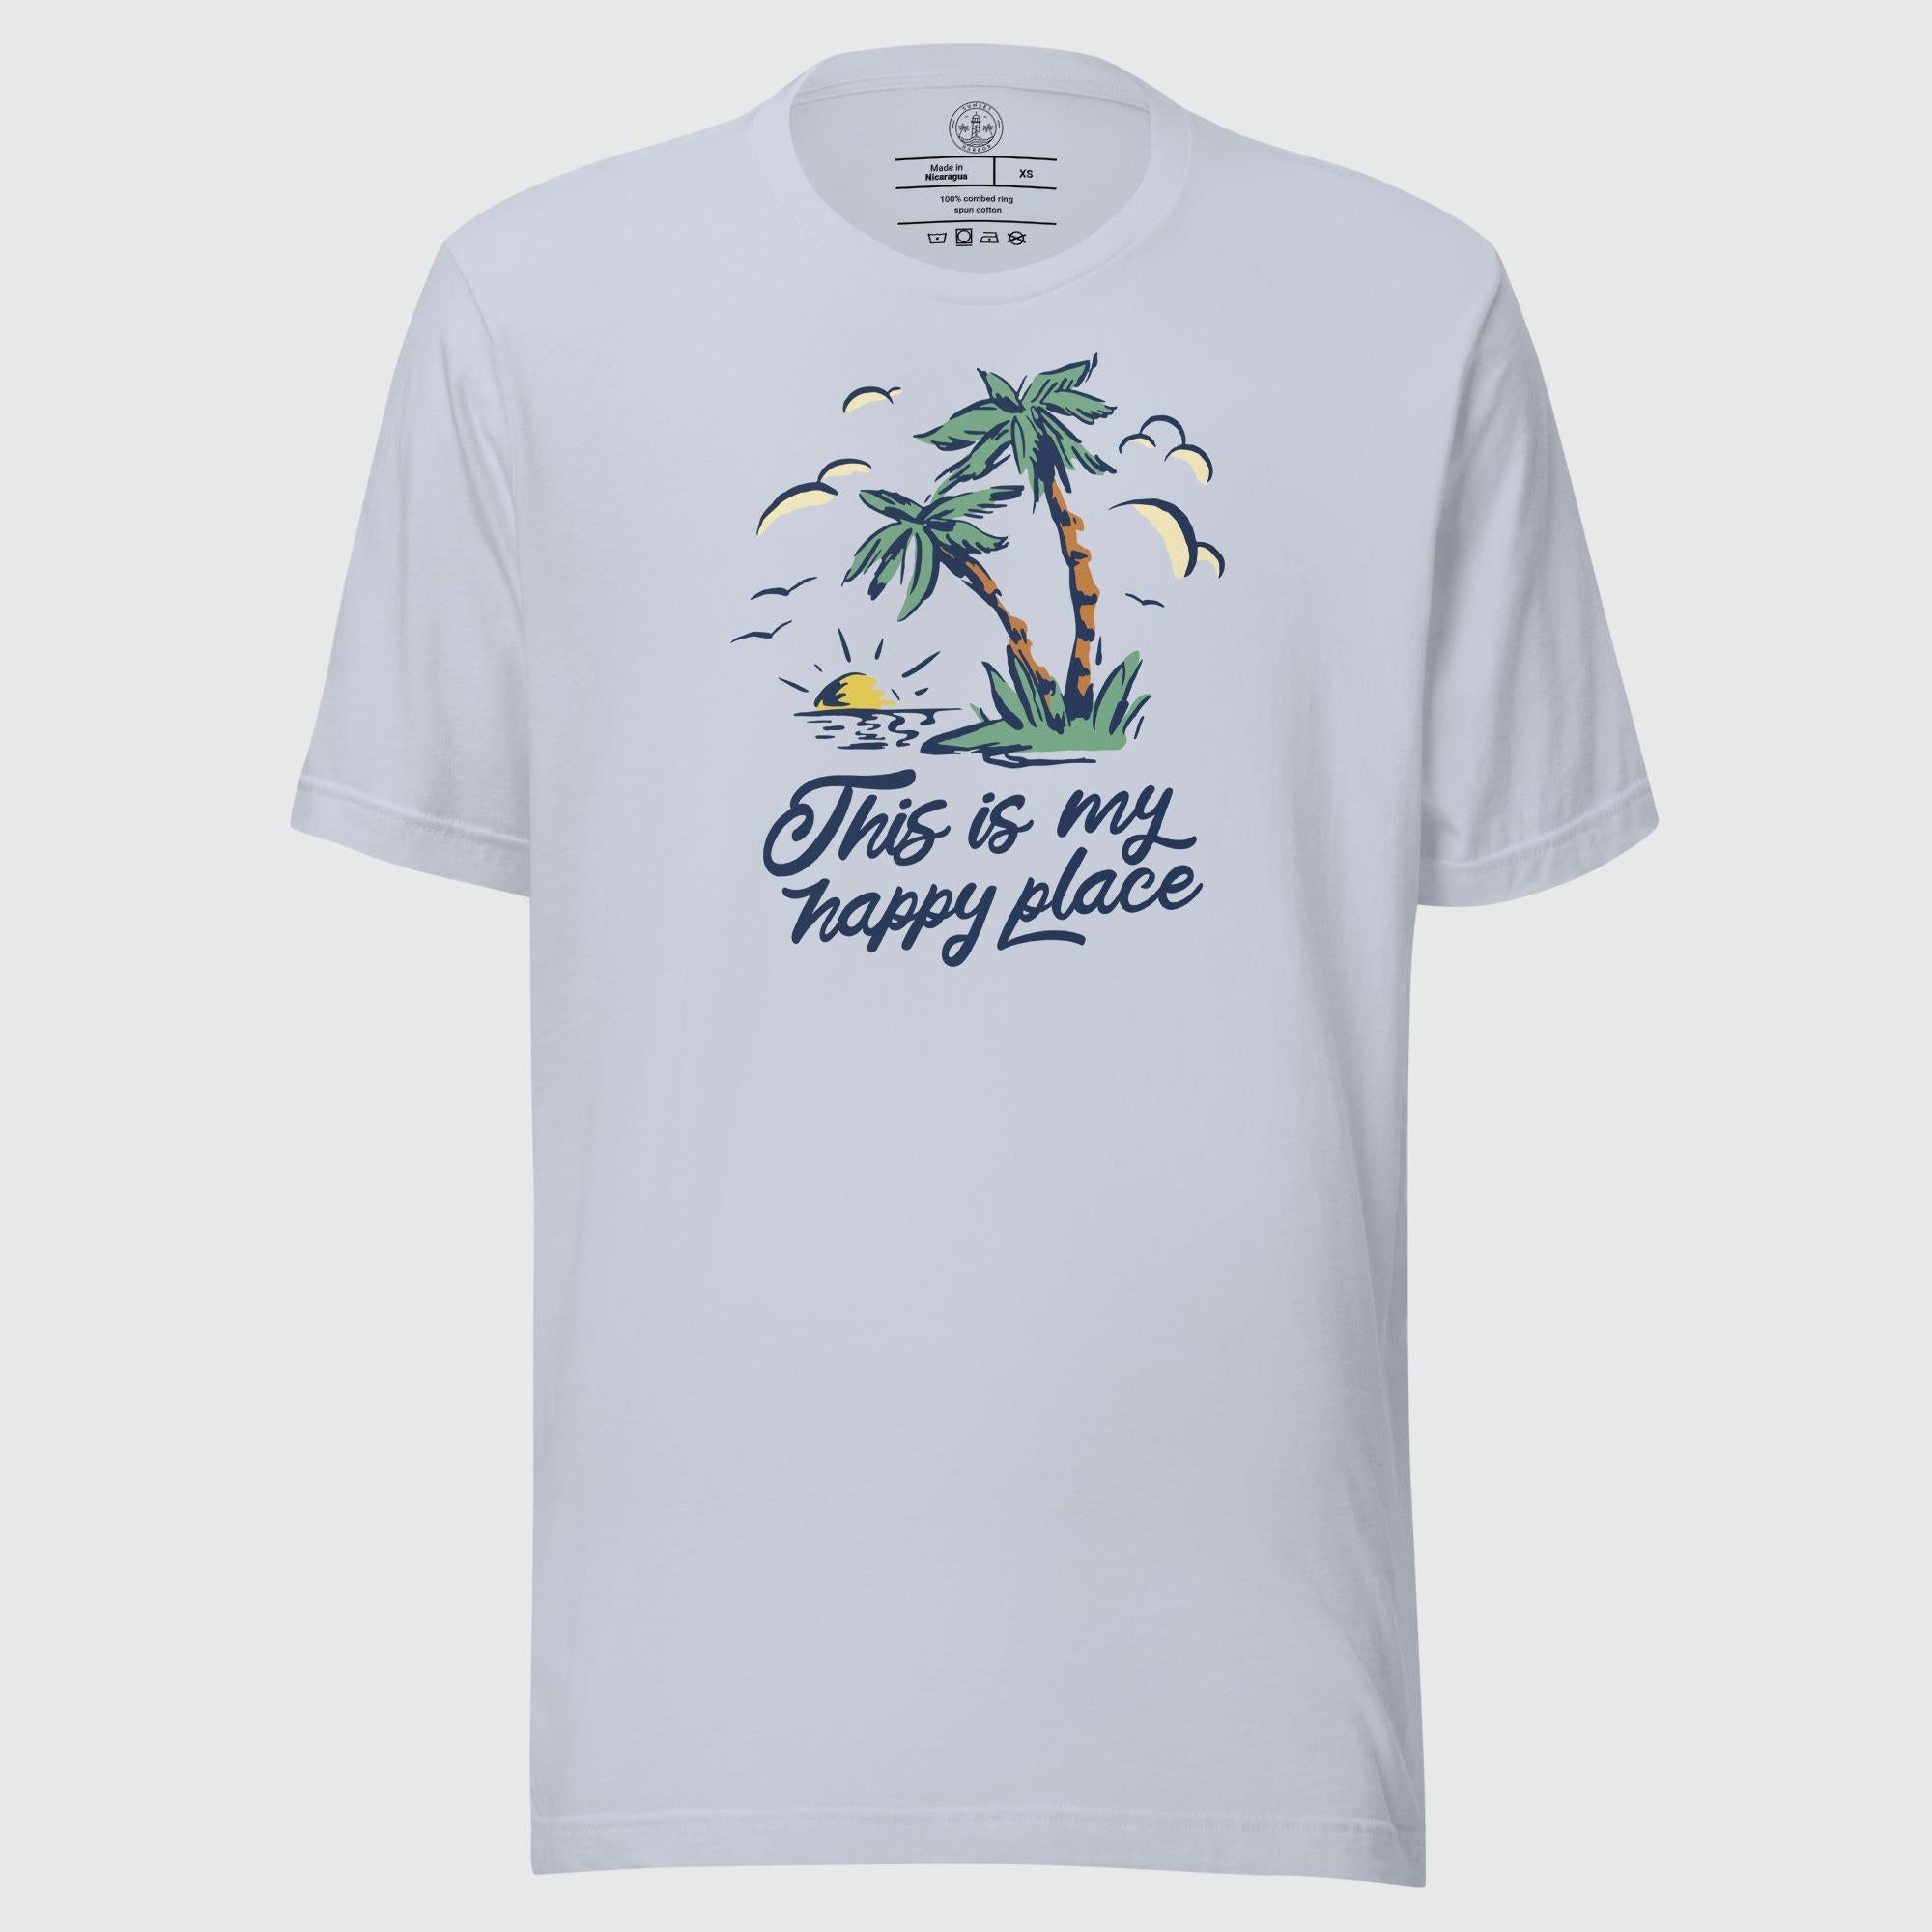 Unisex t-shirt - This is my Happy Place - Sunset Harbor Clothing